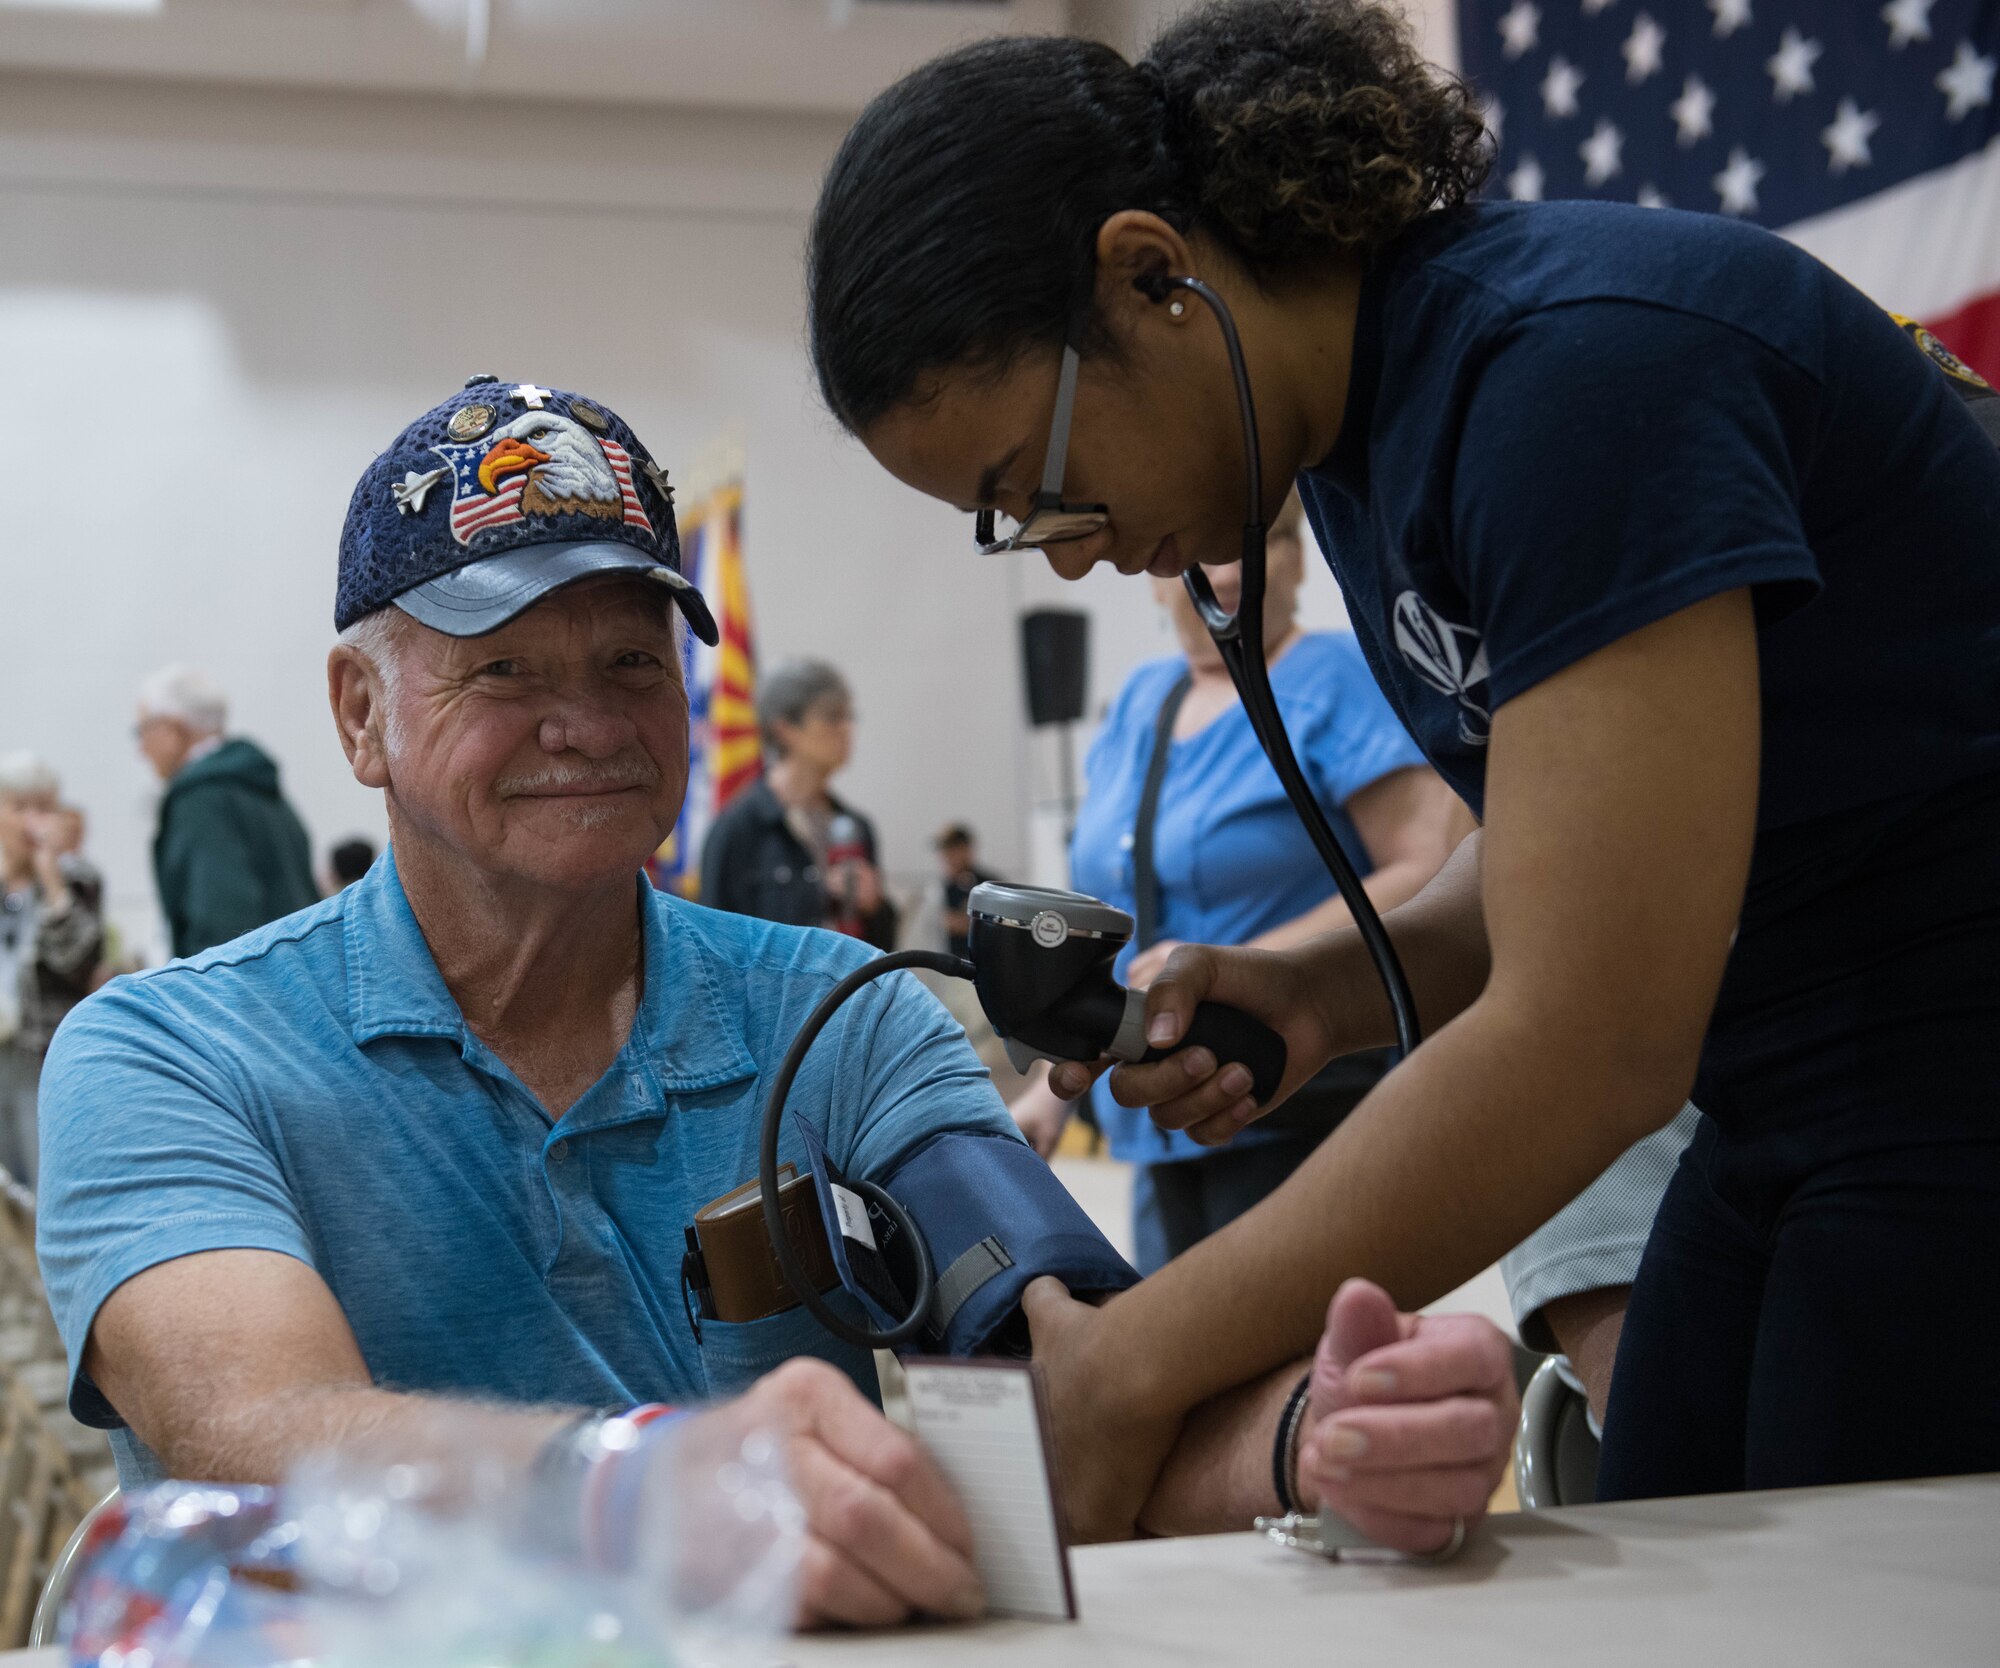 Airman 1st Class Sarah Amato, 56th Operational Medical Readiness Squadron operational medical technician, measures a retiree’s blood pressure during a Retiree Appreciation Day (RAD) event Oct. 26, 2019, at the Navy Operational Support Center in Luke Air Force Base, Ariz.